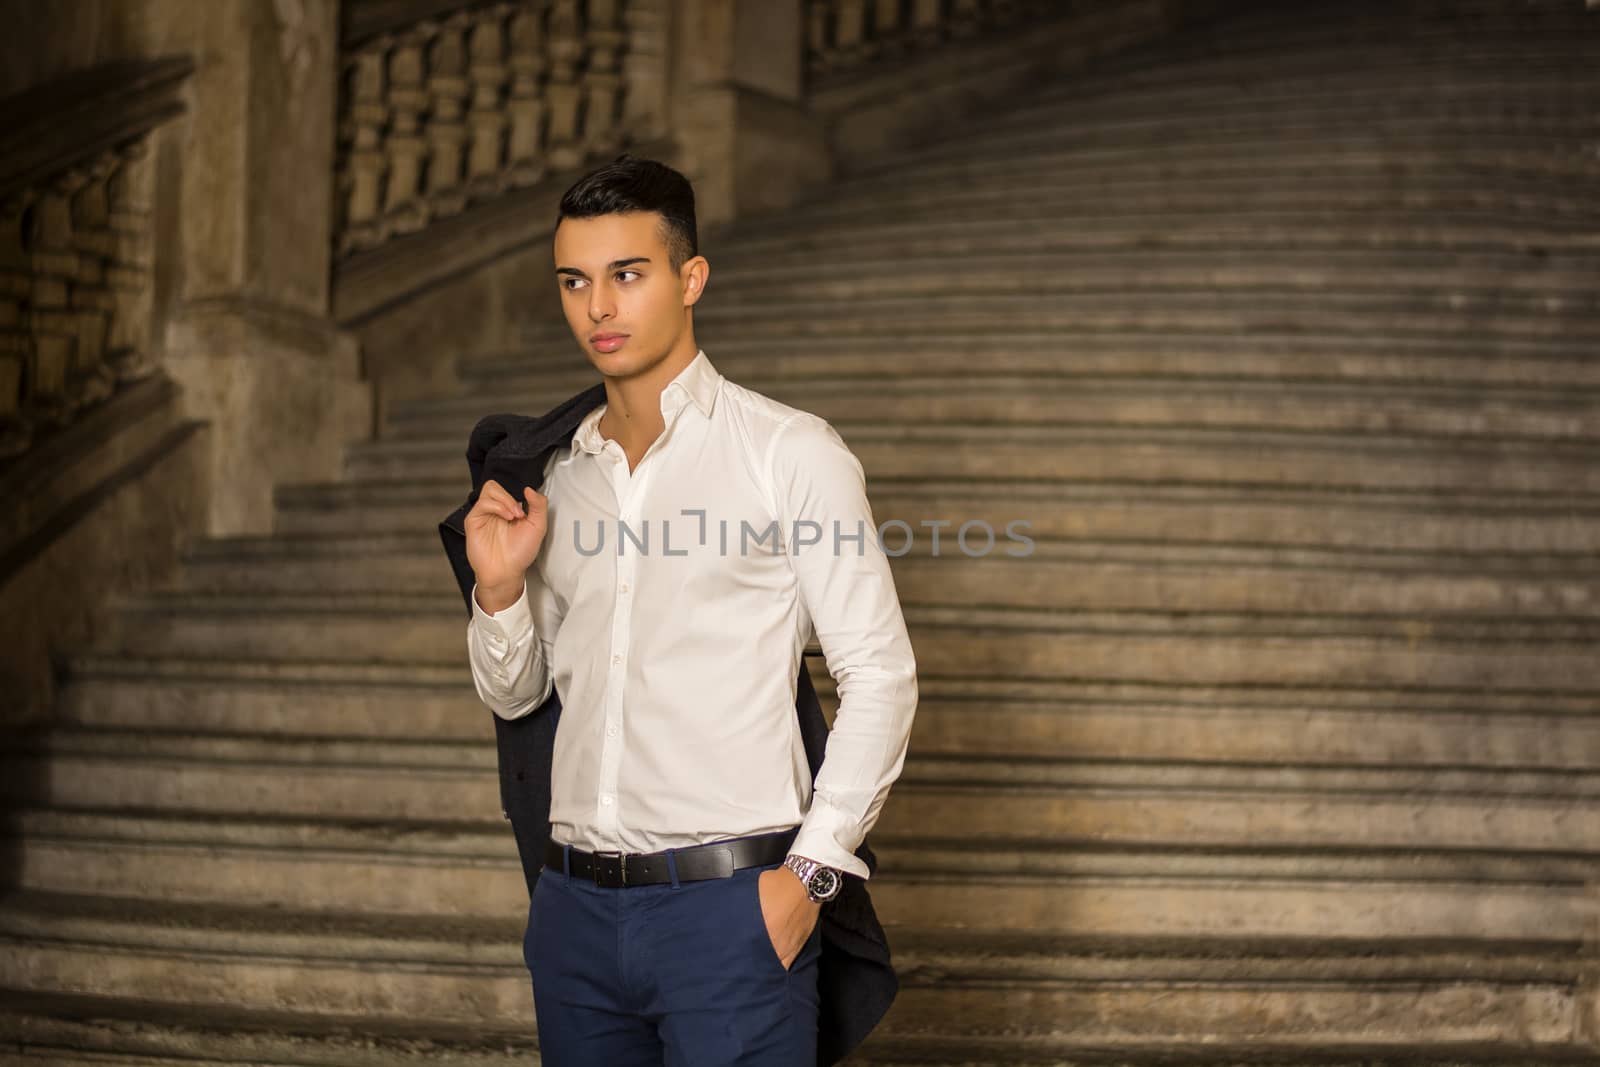 Elegant attractive young man outdoor wearing business suit, in European city on old stairs